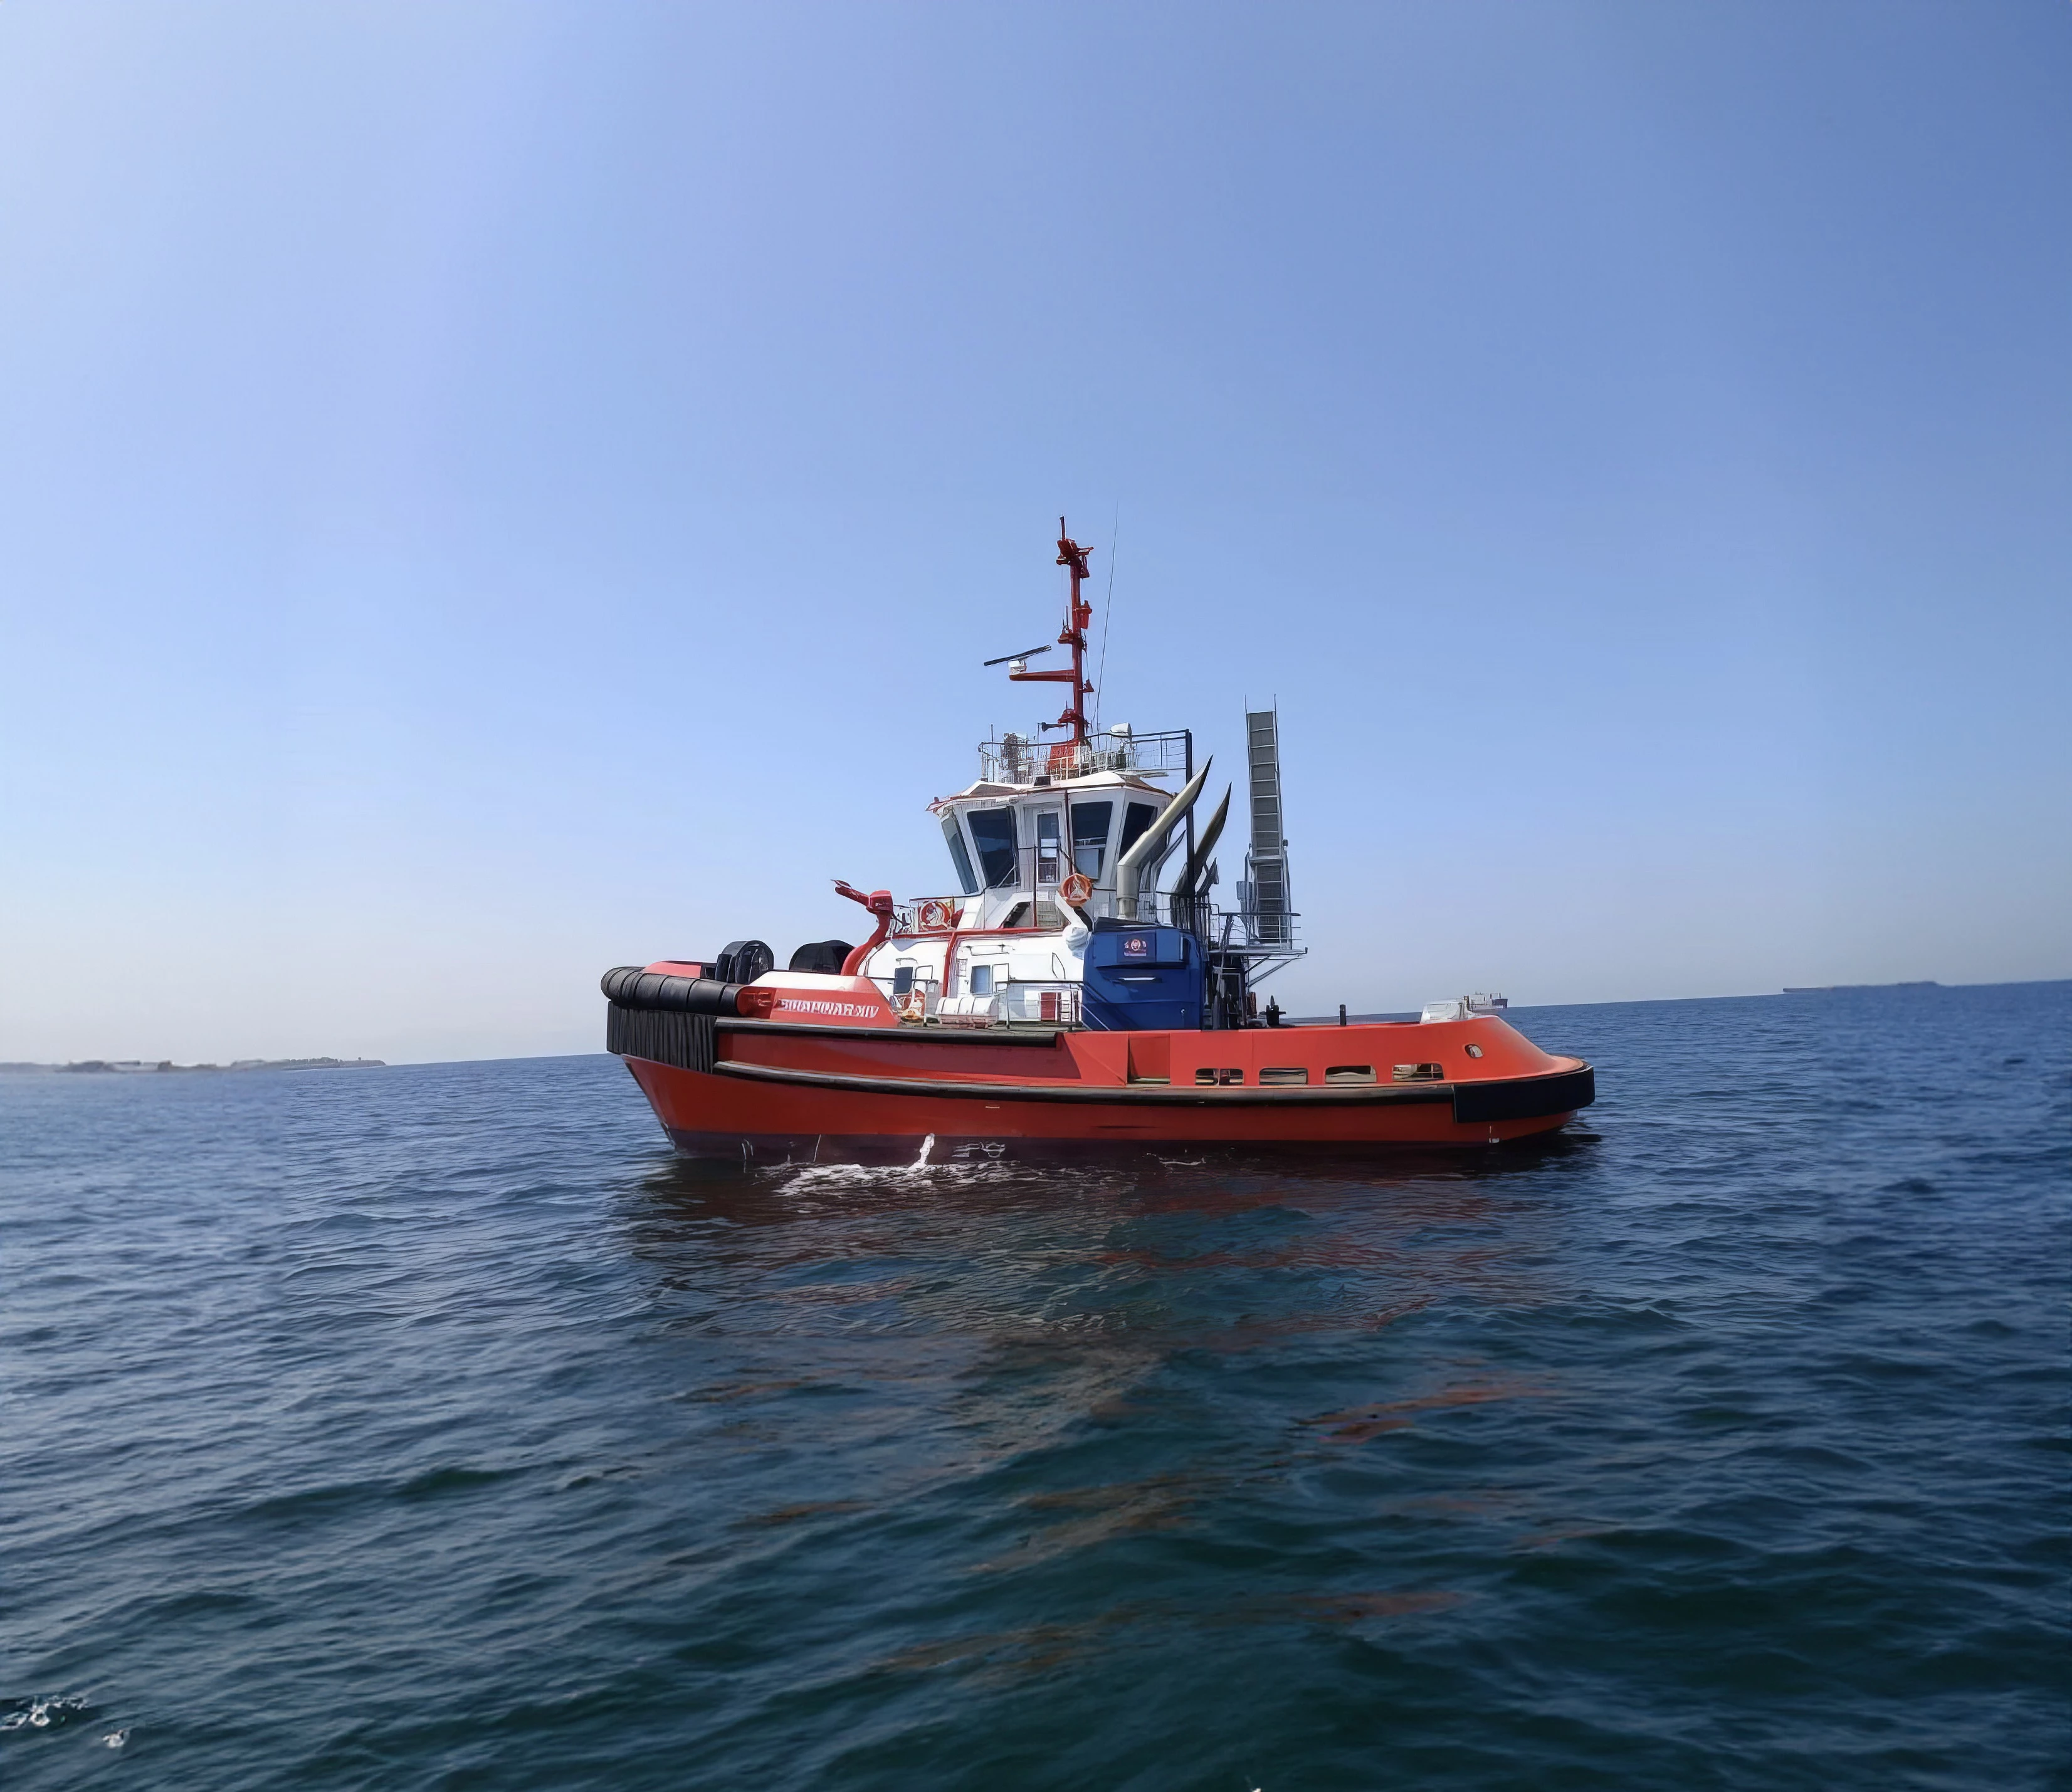 SMS Towage Limited's new TRADESMAN vessel at sea.